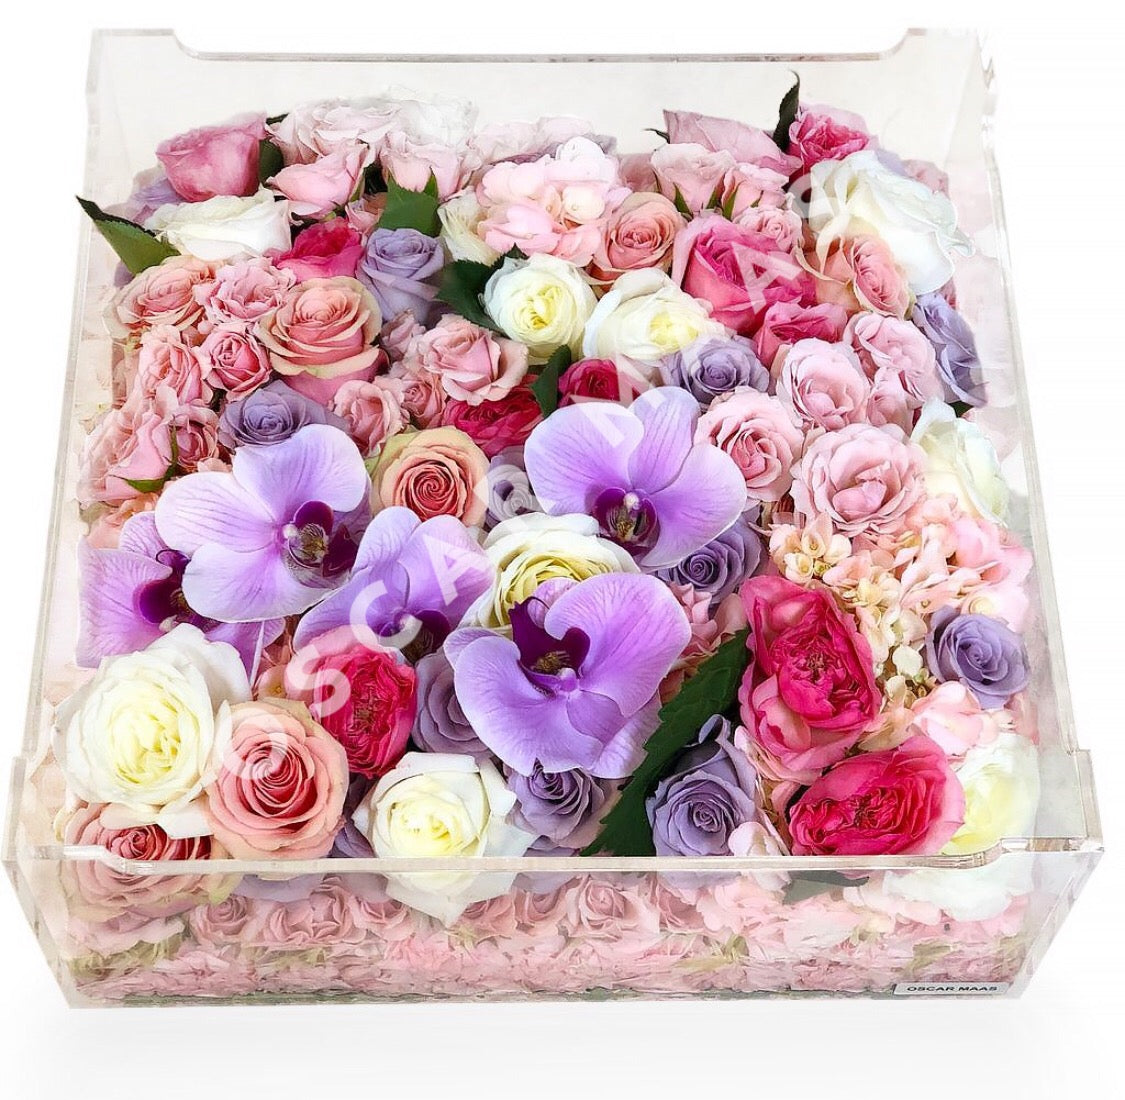 Boxed Blooms - Large